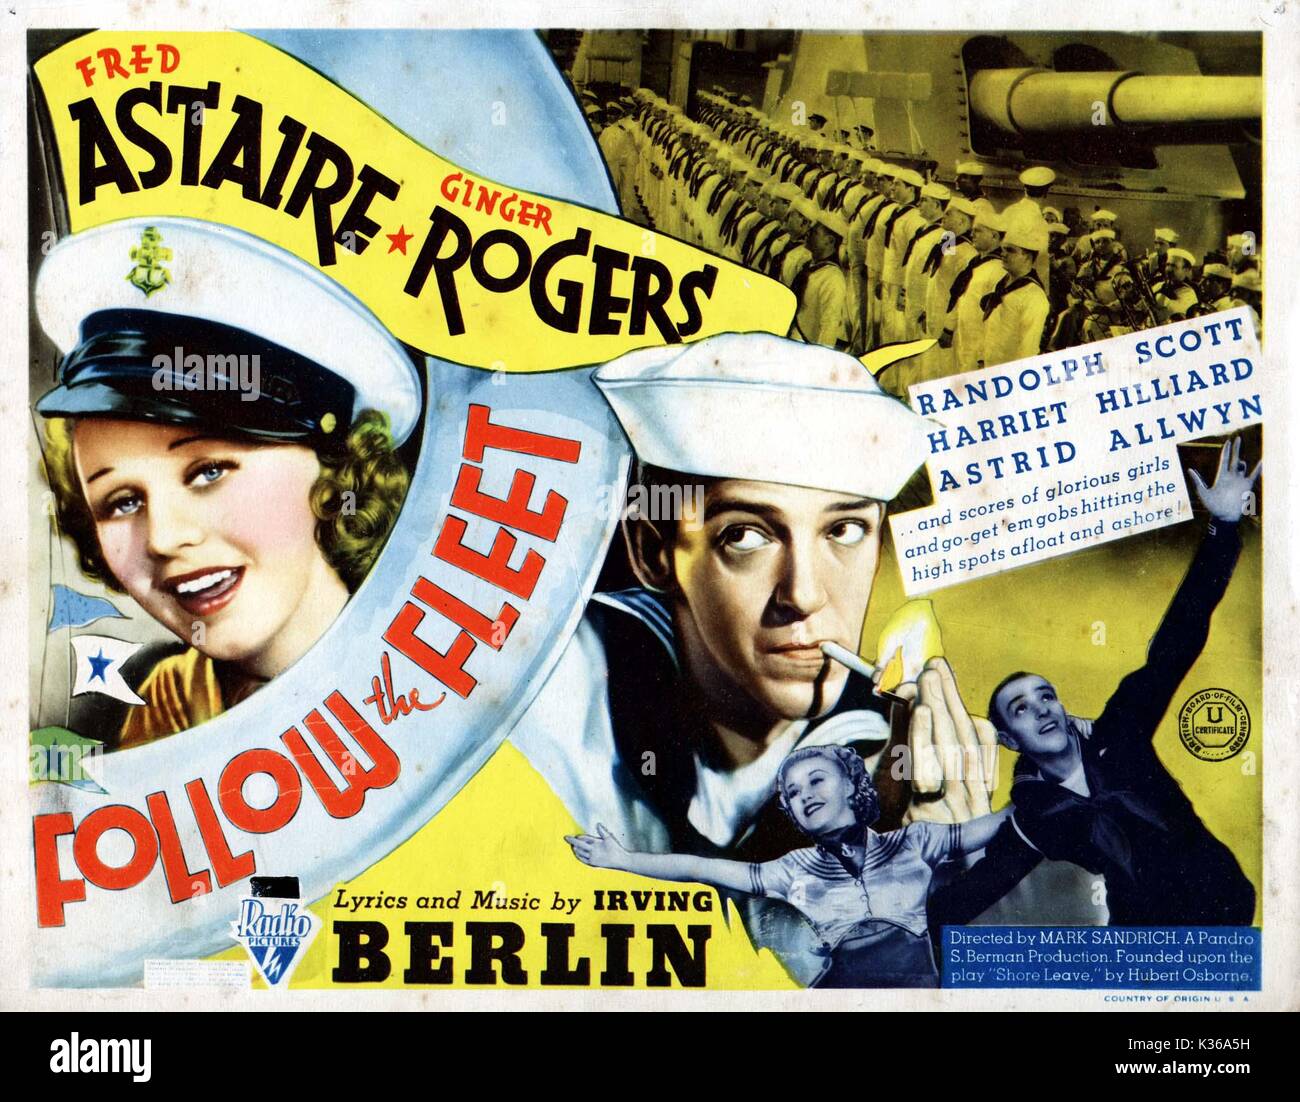 FOLLOW THE FLEET Ginger Rogers and Fred Astaire lobby card from the Ronald Grant Archive     Date: 1936 Stock Photo